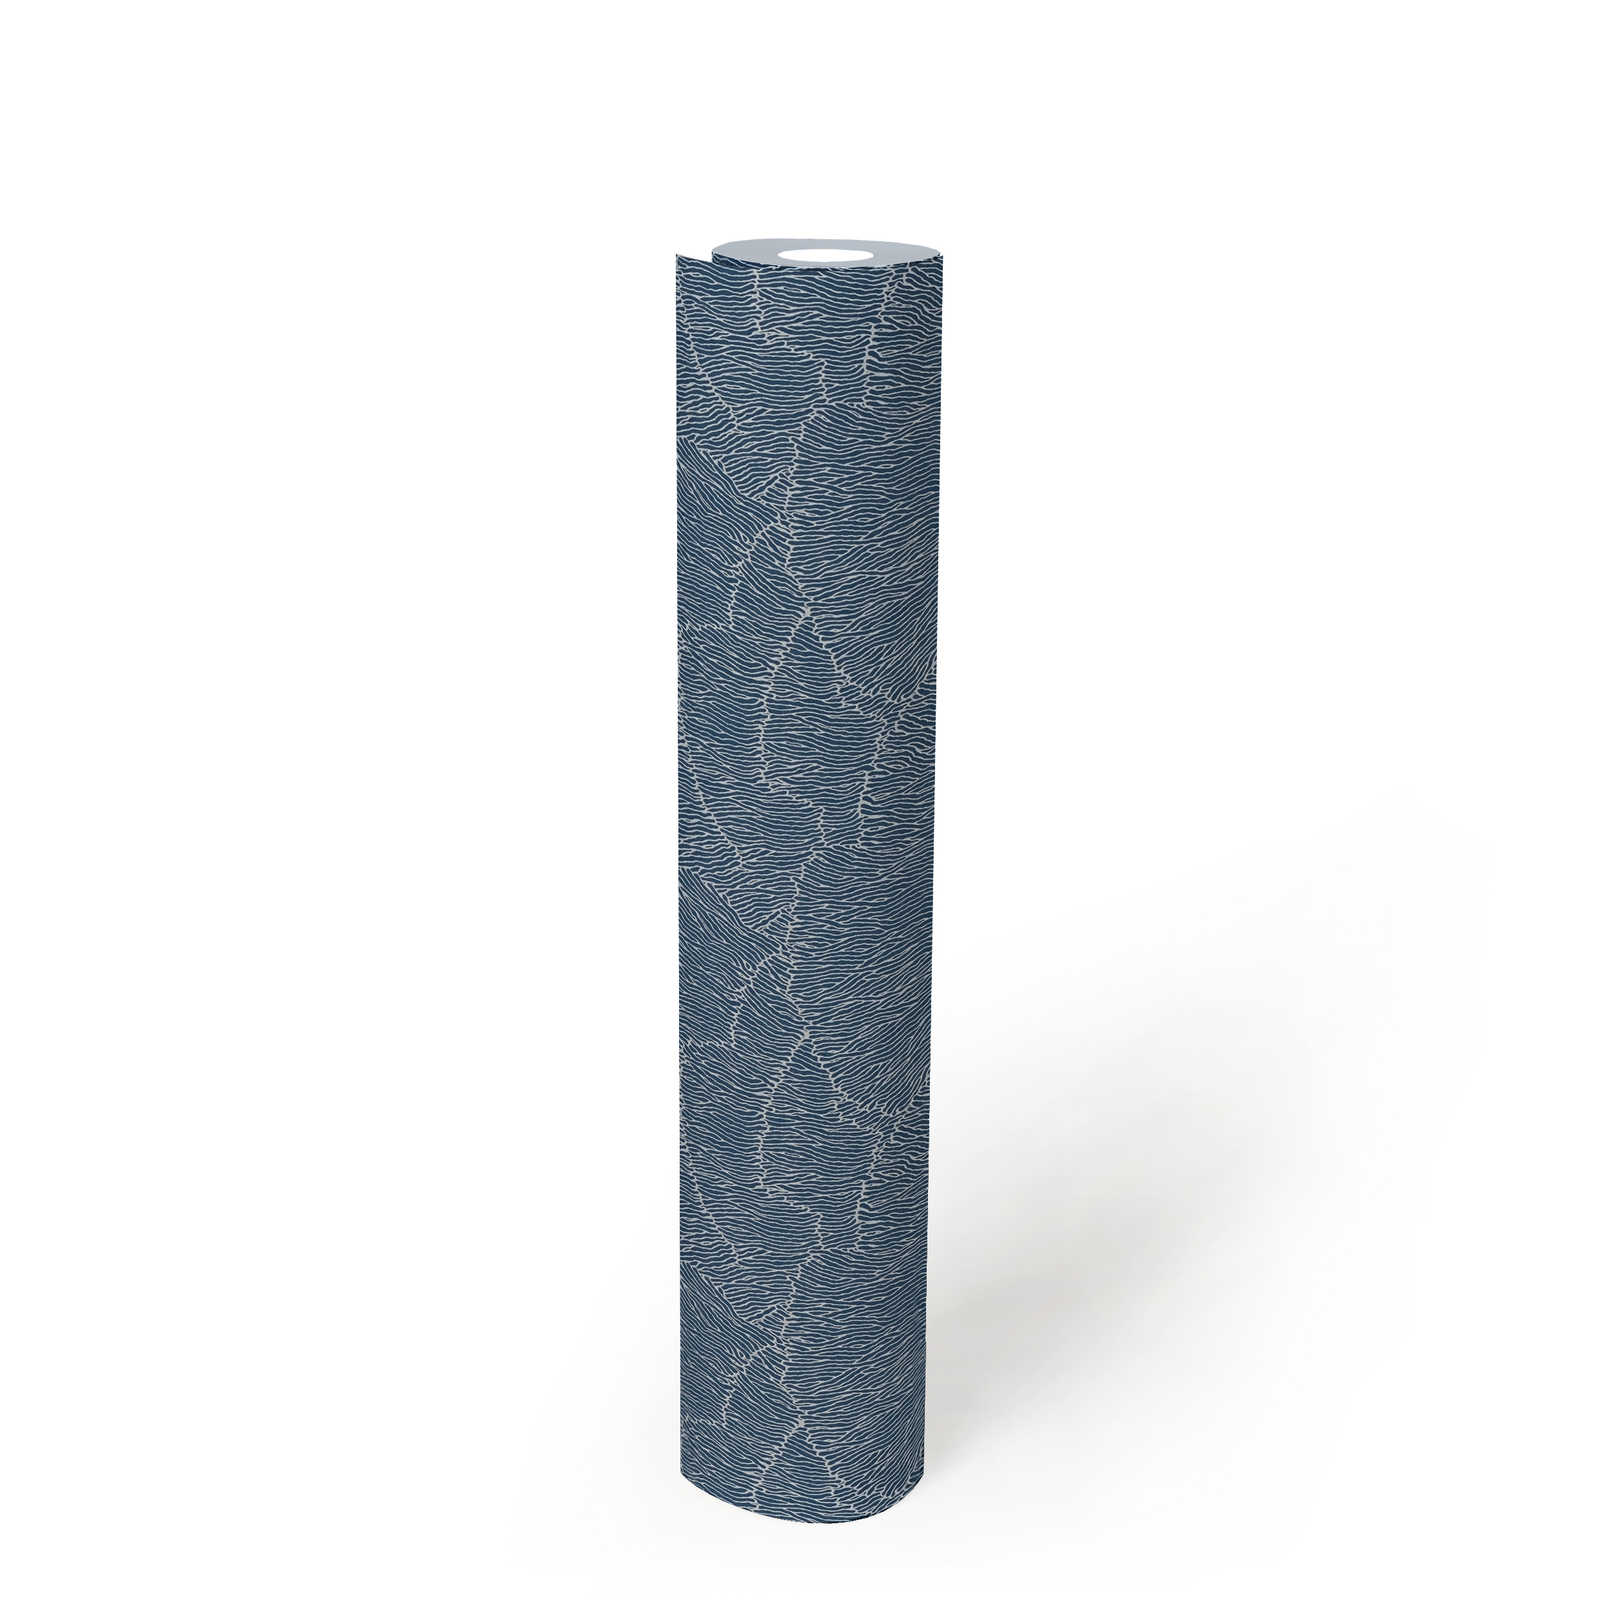             Non-woven wallpaper with line pattern - silver, blue, metallic
        